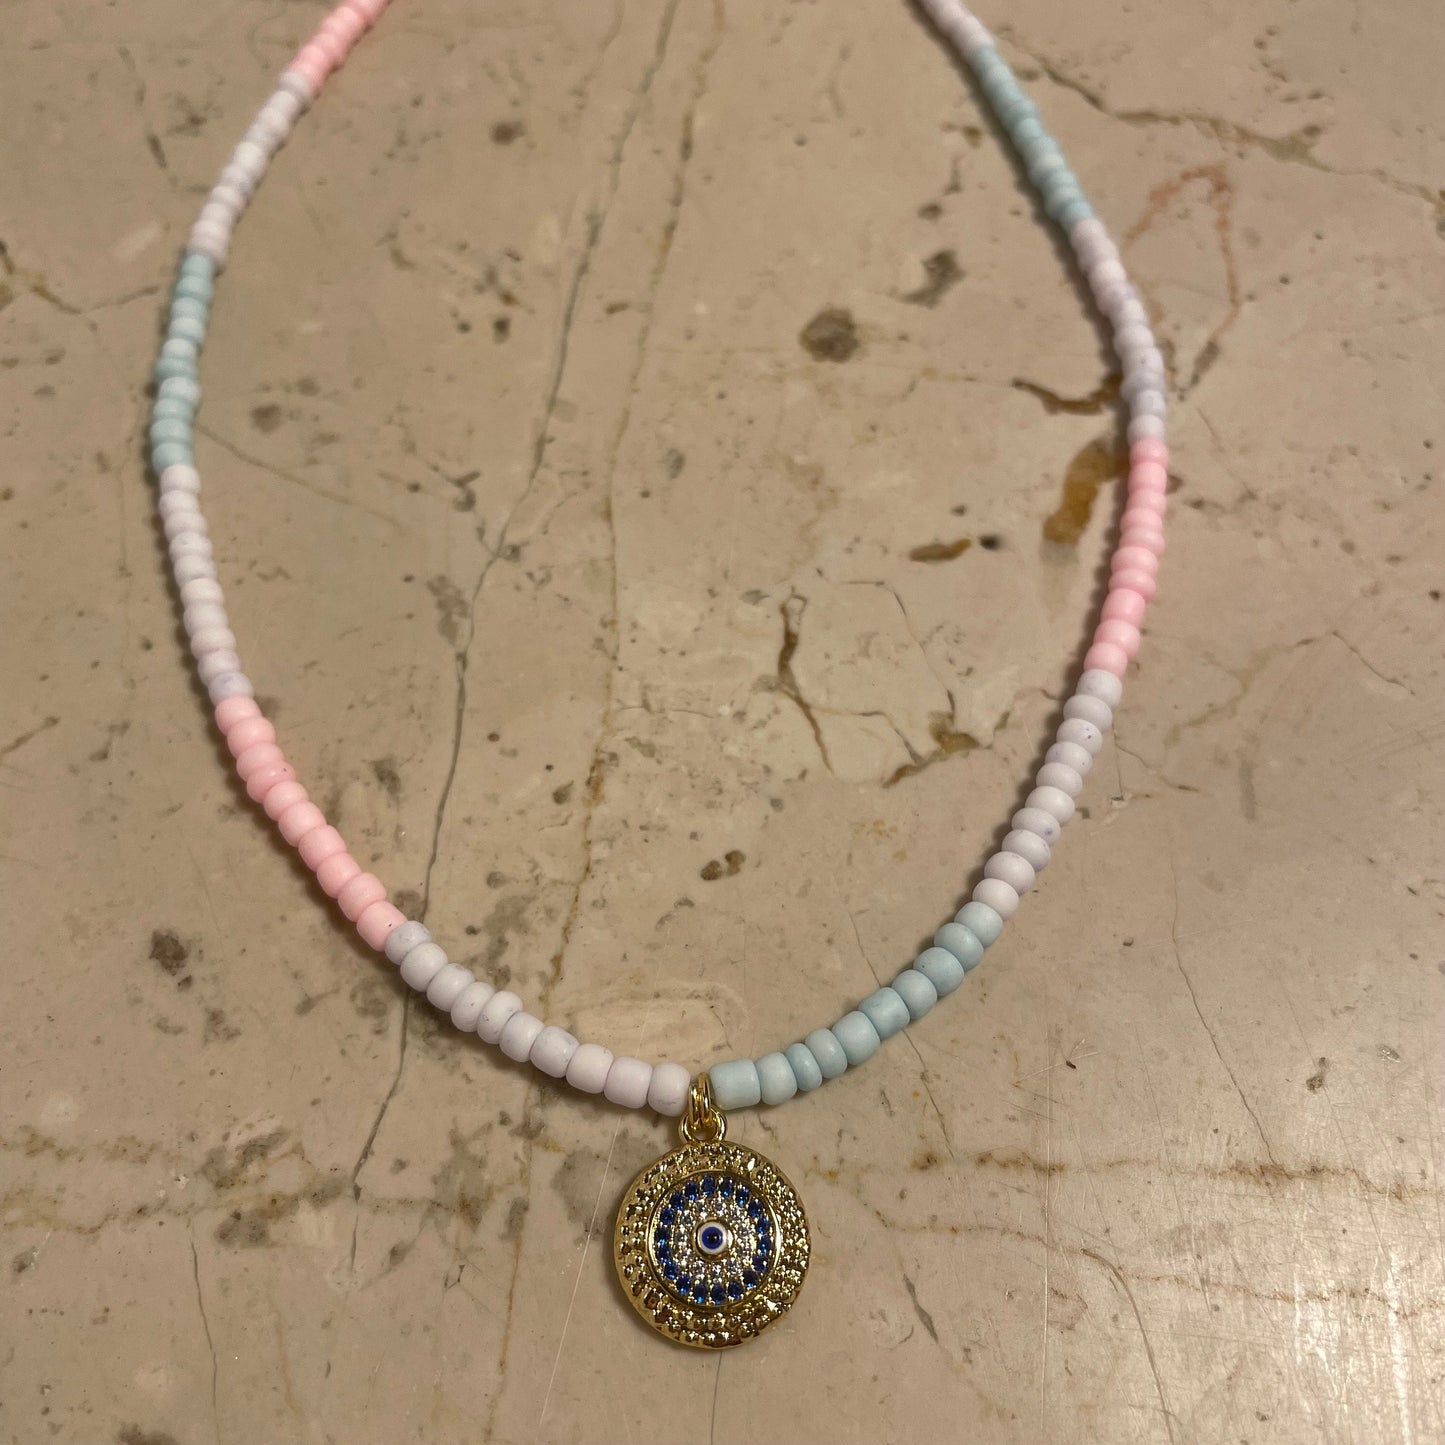 Ombre thin beaded necklace in pastel colors and evil eye charm